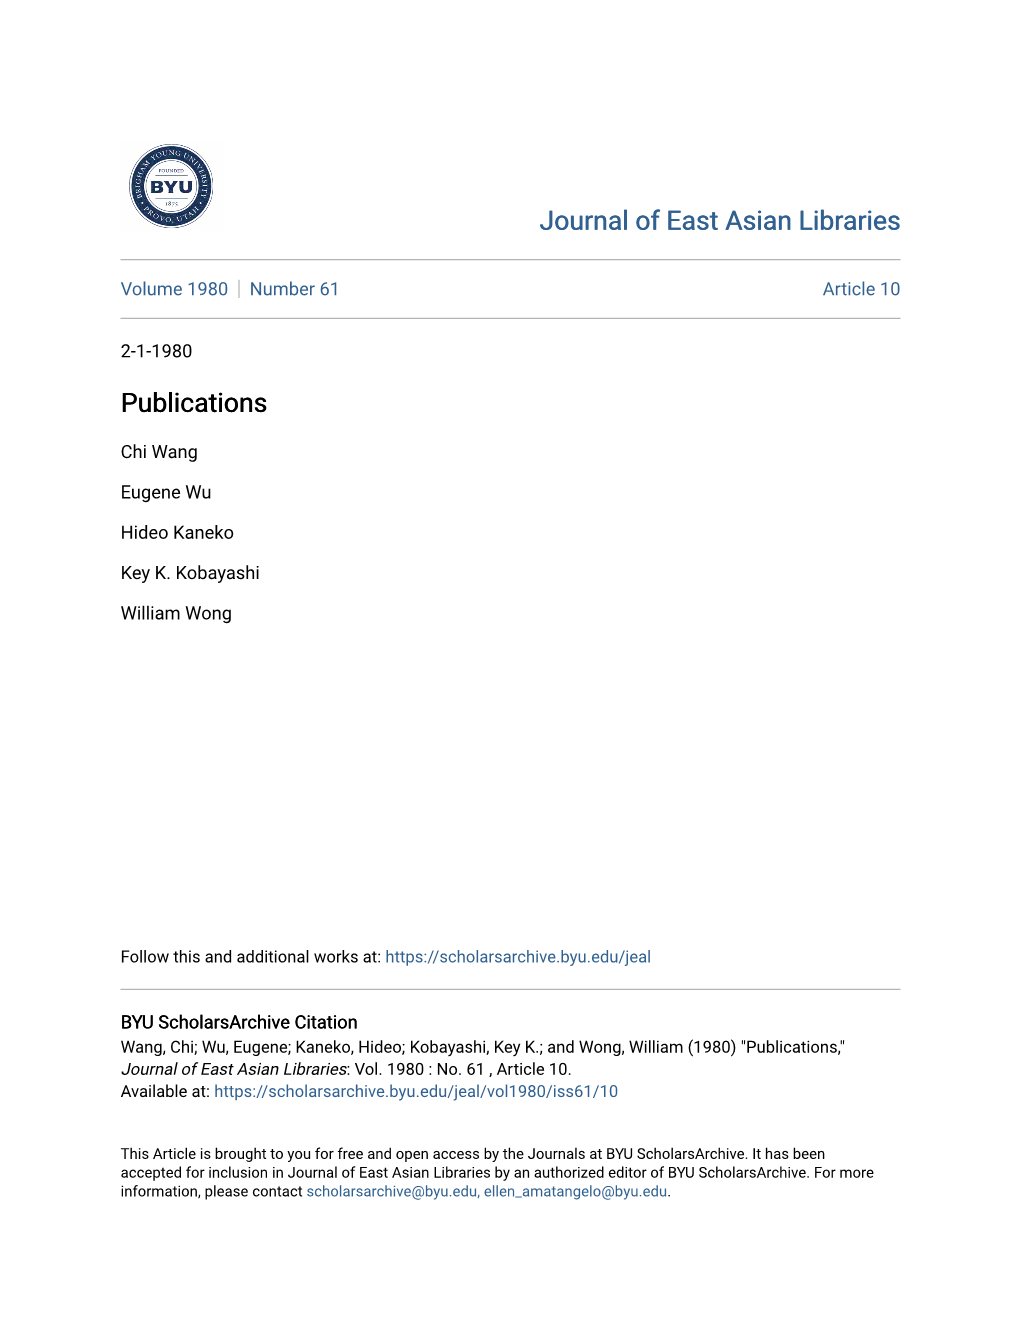 Journal of East Asian Libraries Publications